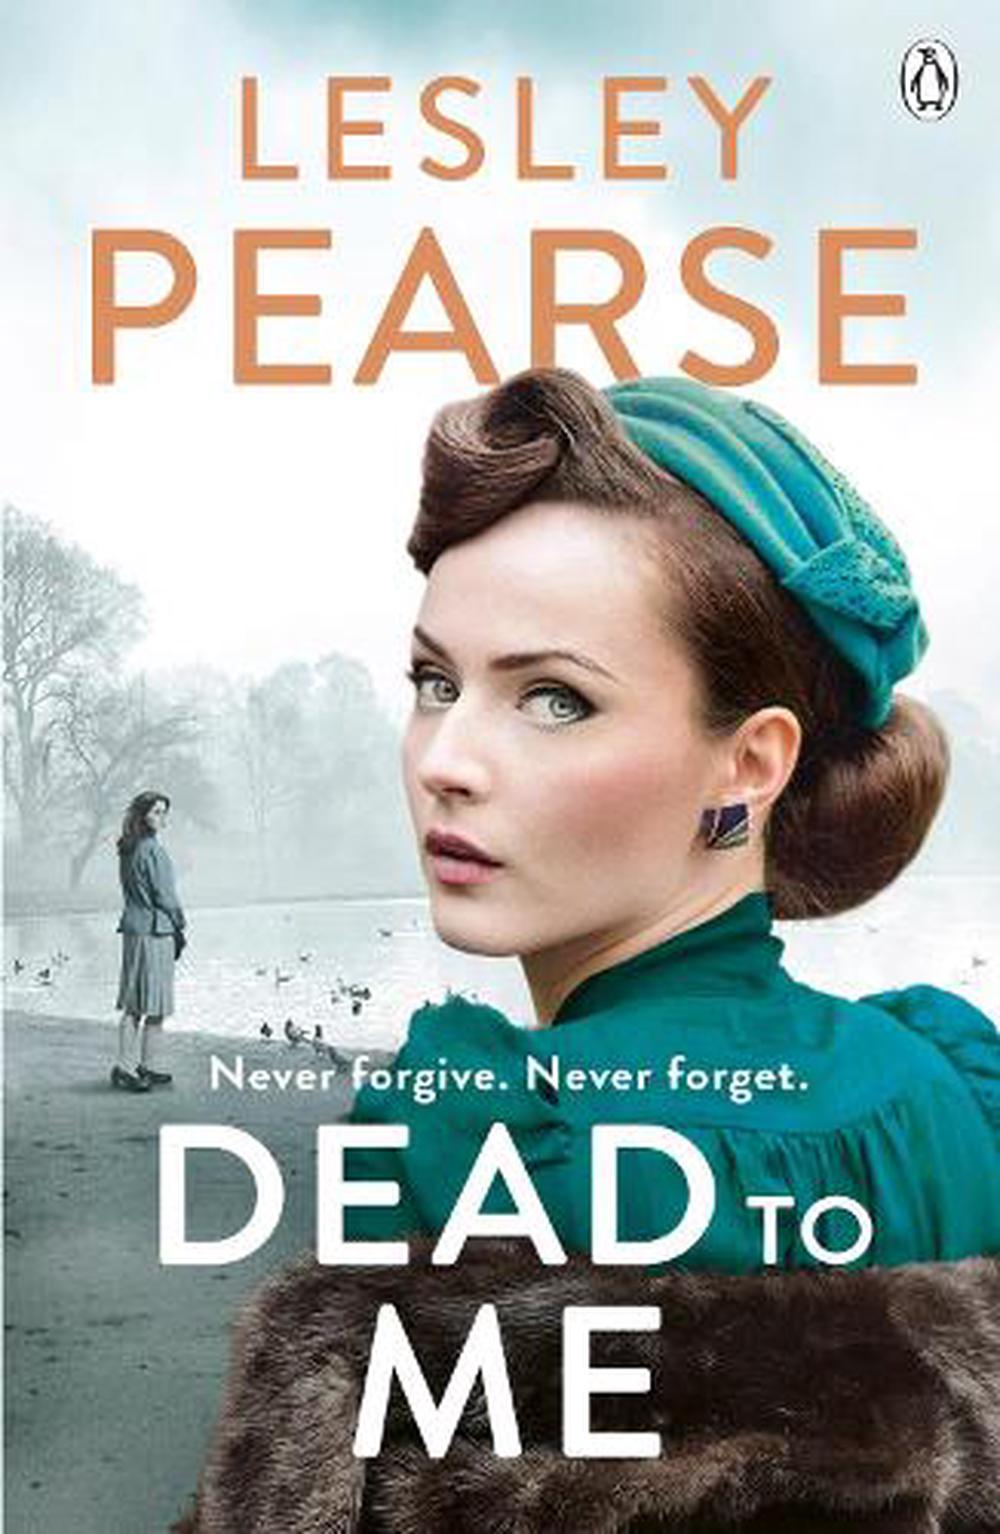 Dead to Me by Lesley Pearse, Paperback, 9781405921046 | Buy online at ...